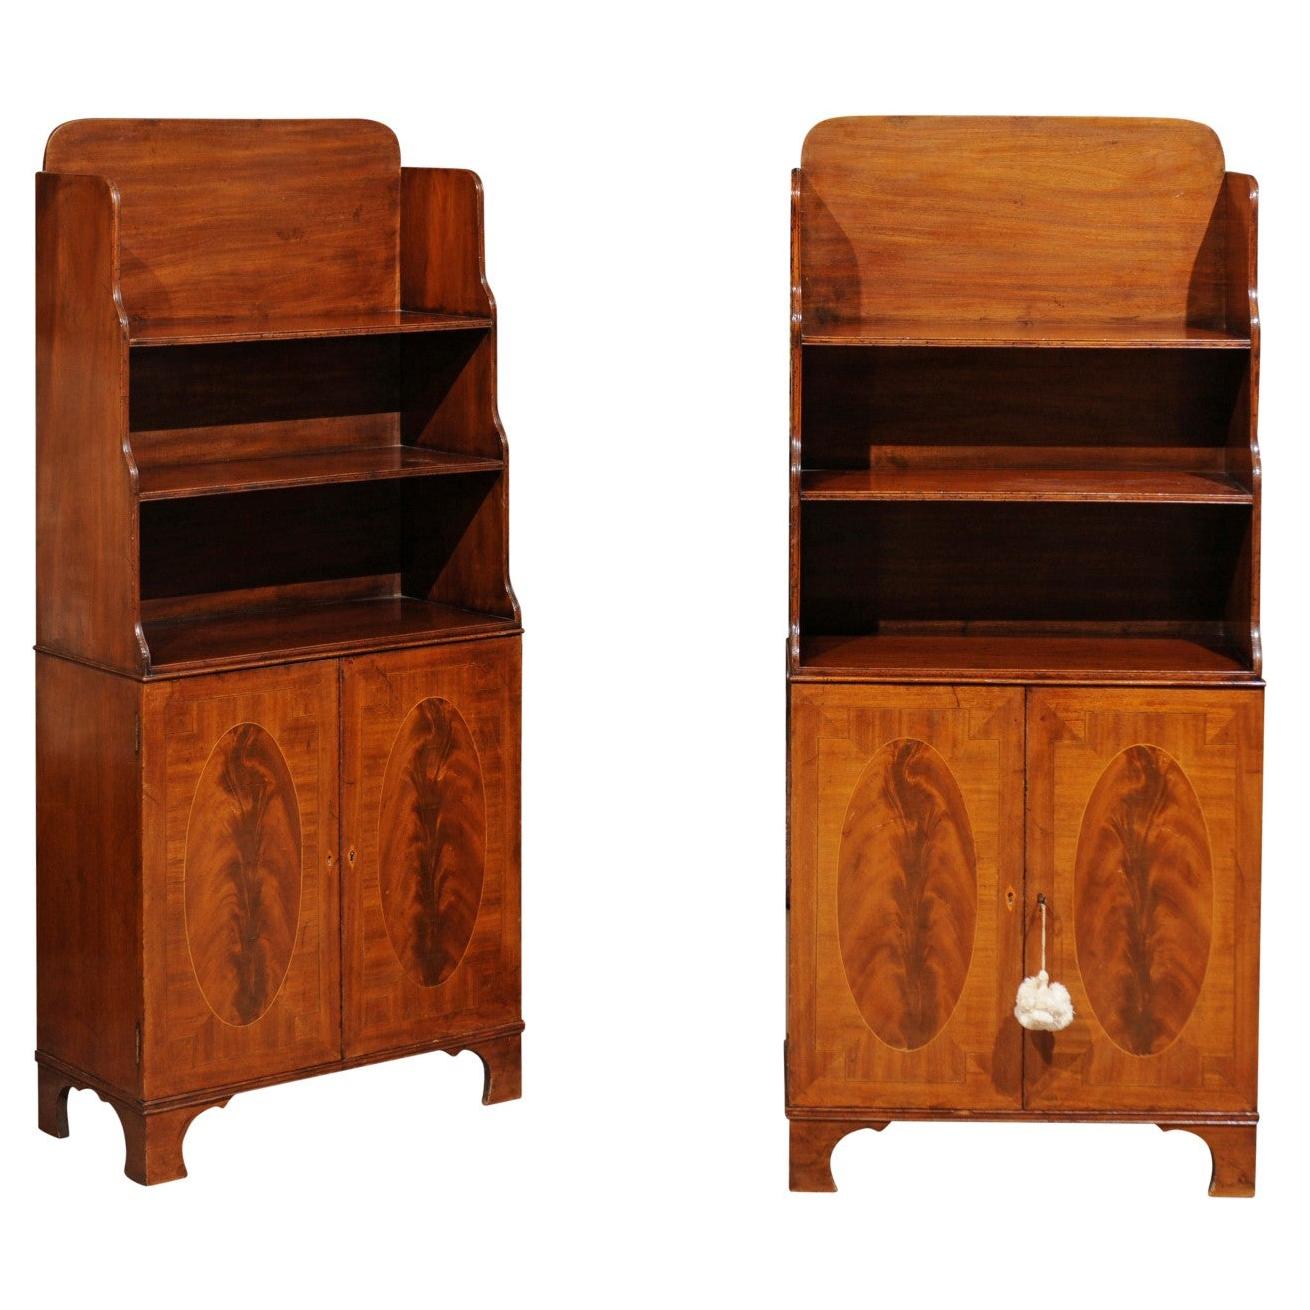 Pair of 19th Century English Regency Style Mahogany Bookcases For Sale